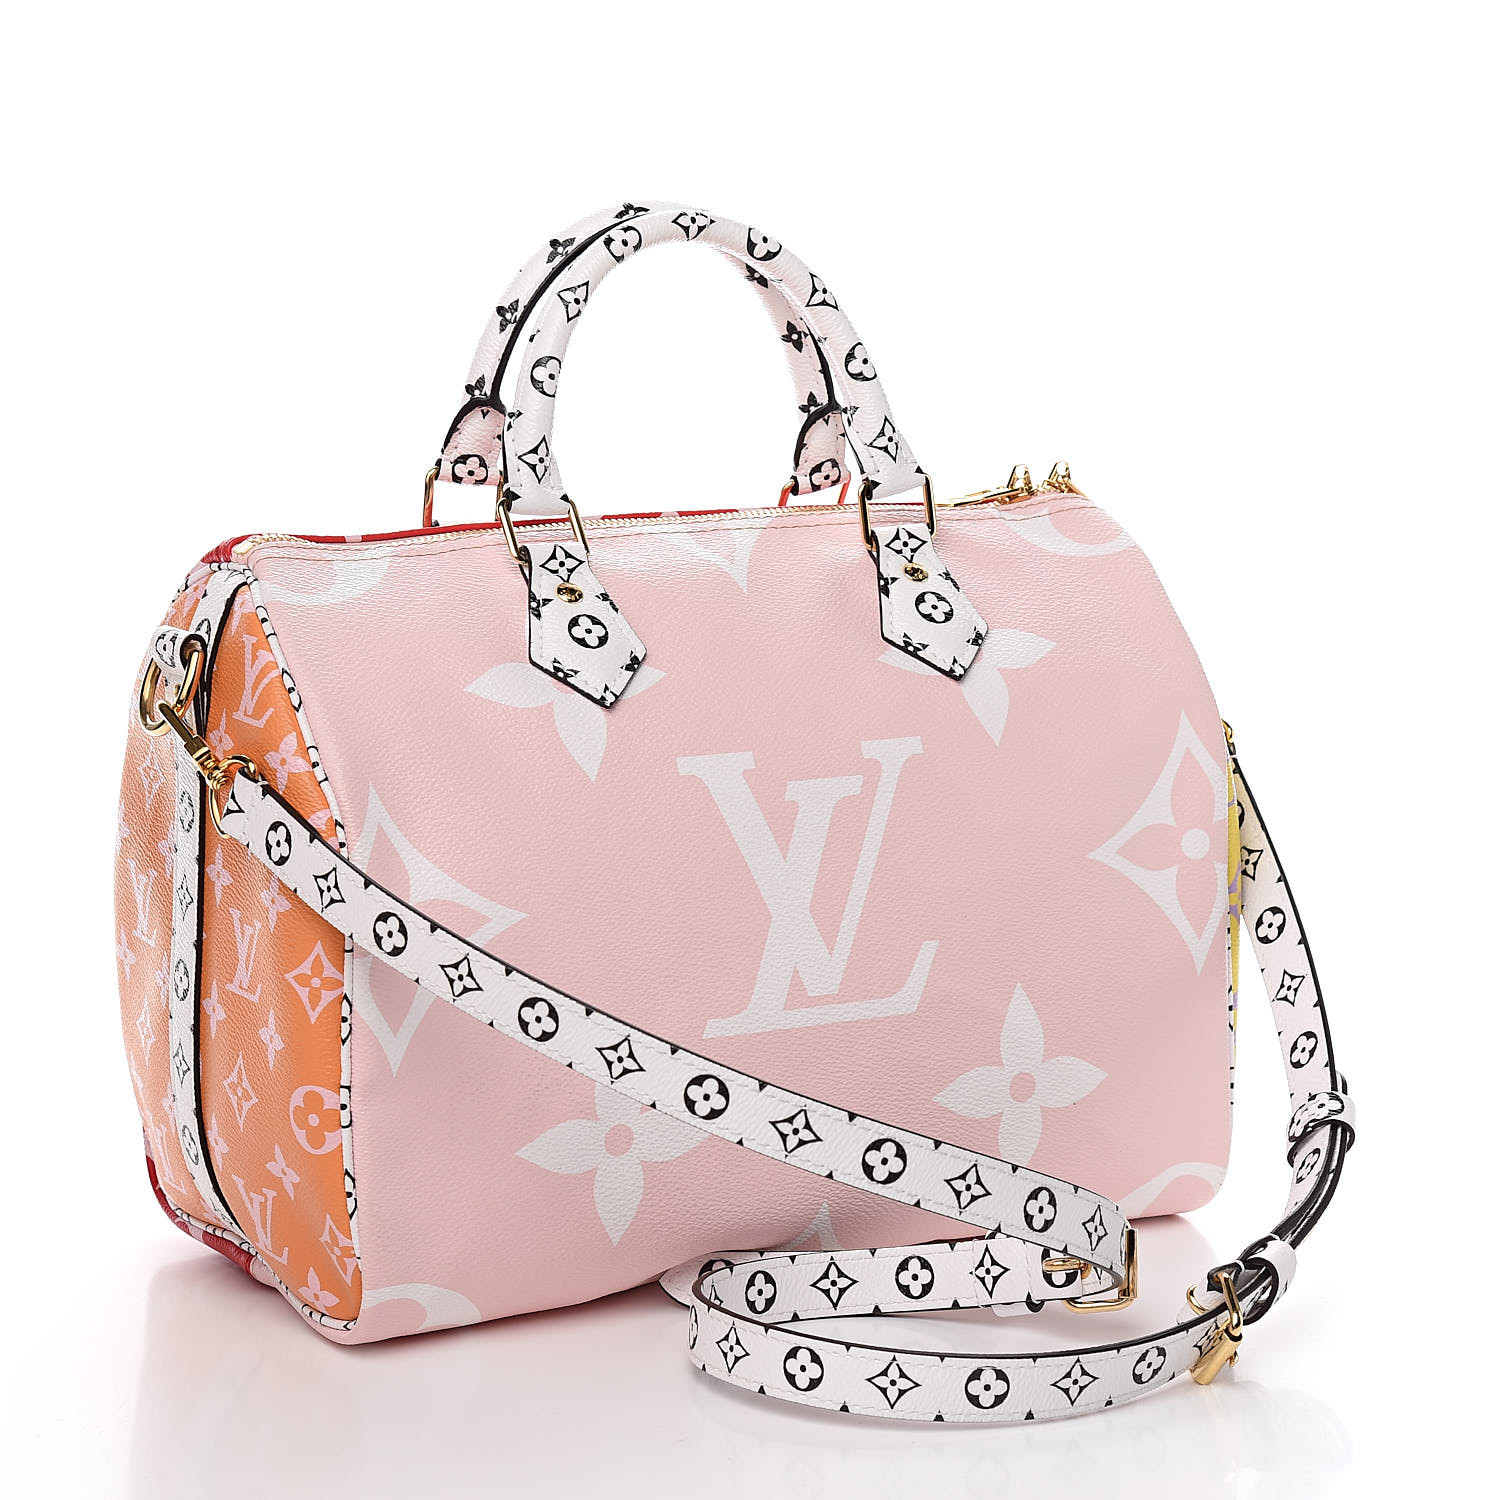 Lv Speedy Sizes In Inches  Natural Resource Department